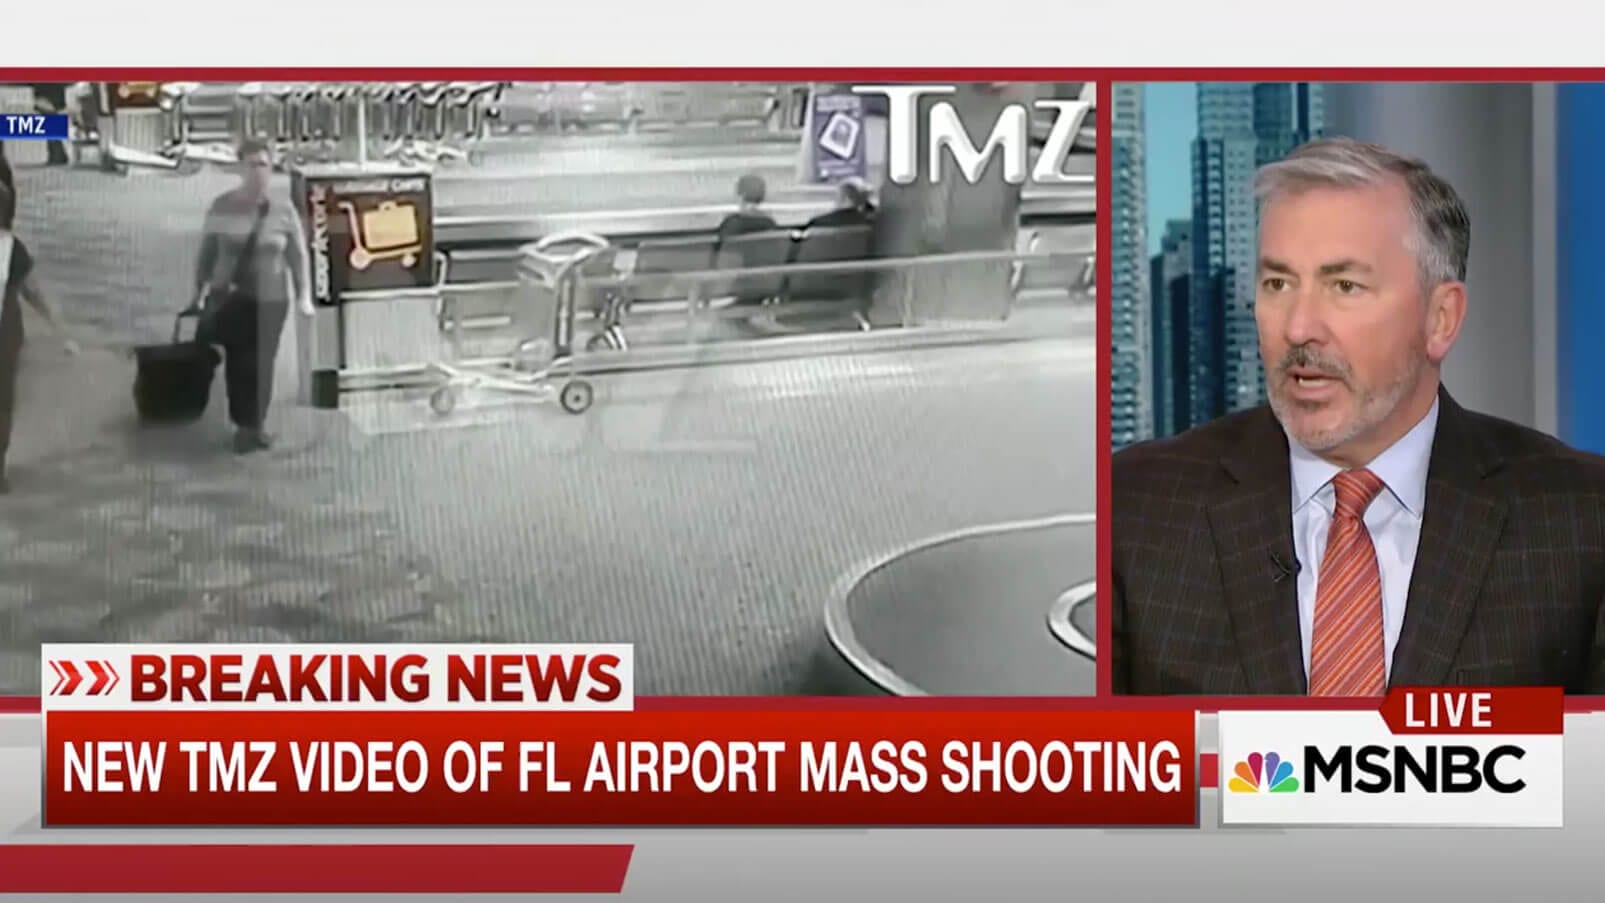 Michael Balboni Discusses With MSNBC, the Video of the Fort Lauderdale Airport Shooting